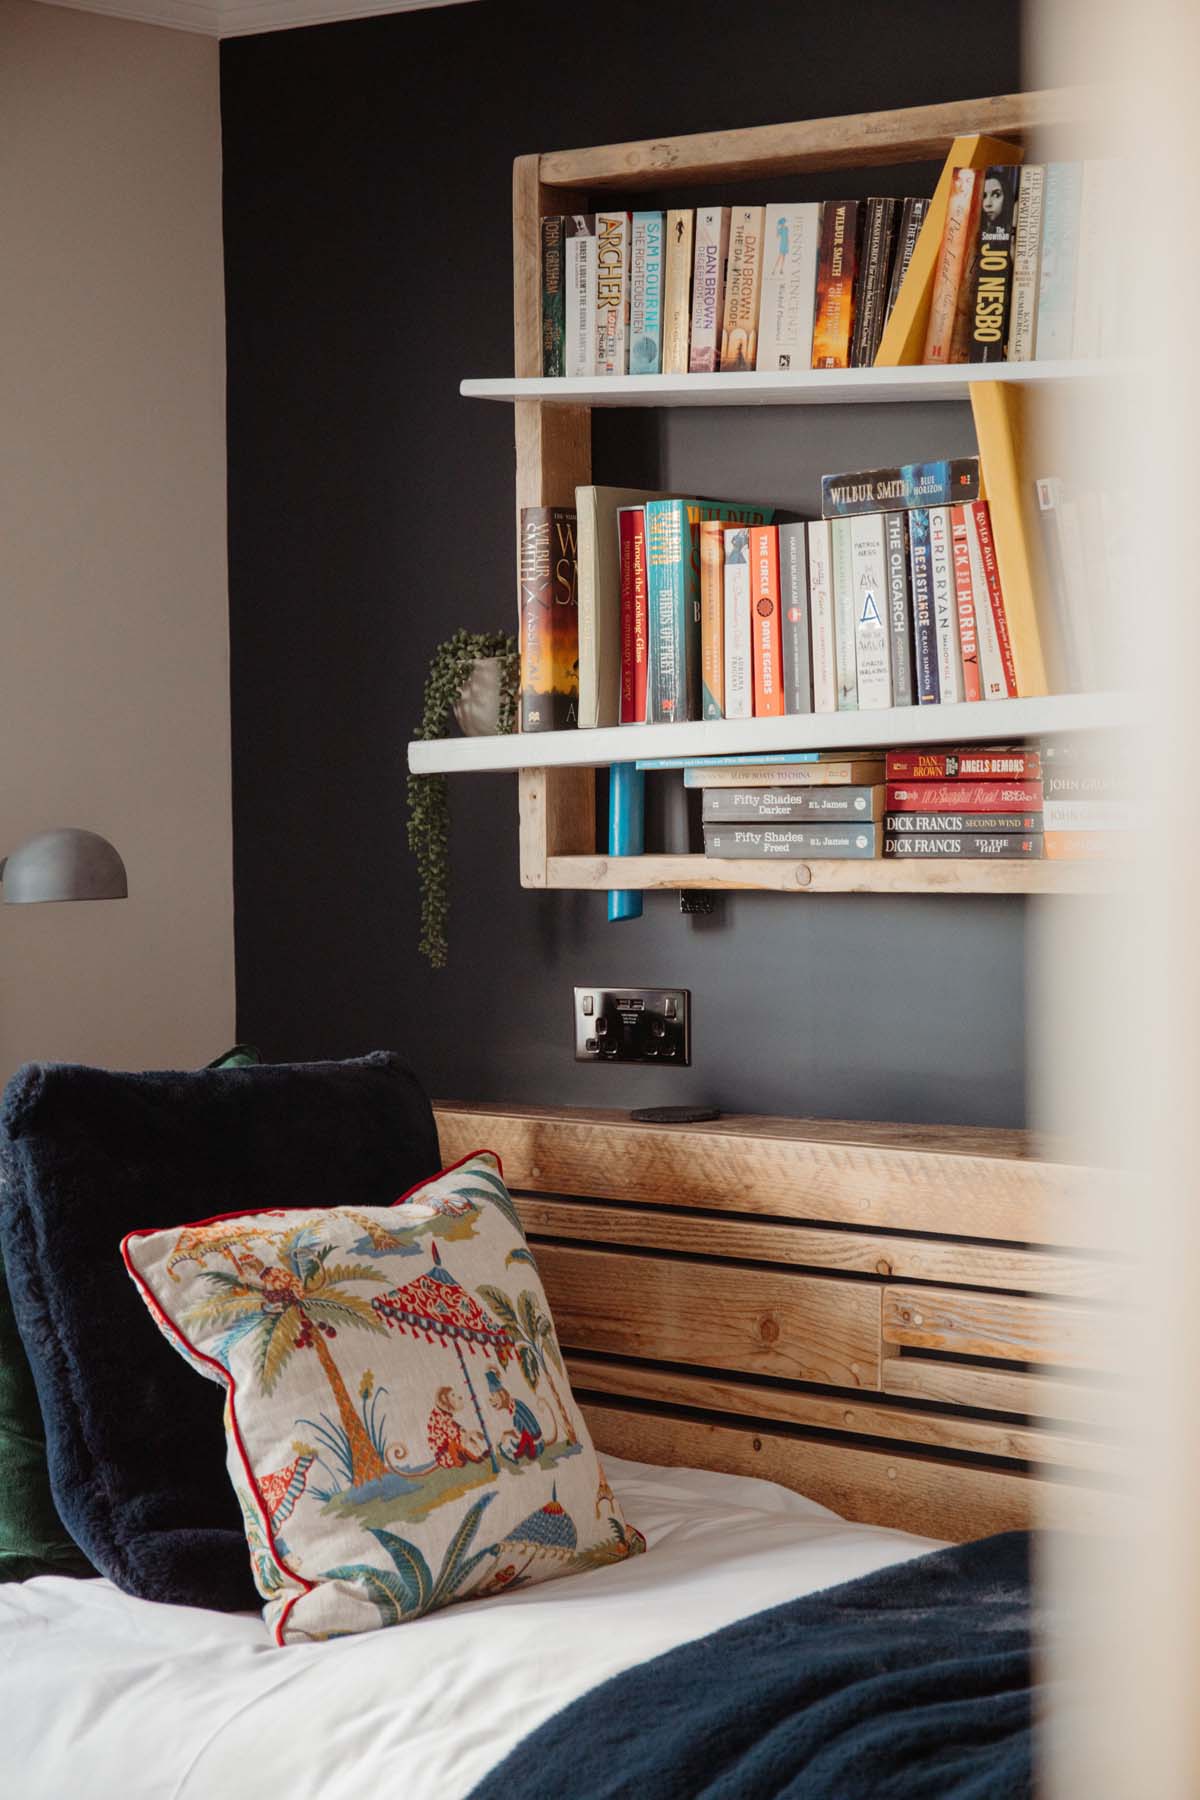 Single bed with wooden book shelf on the wall